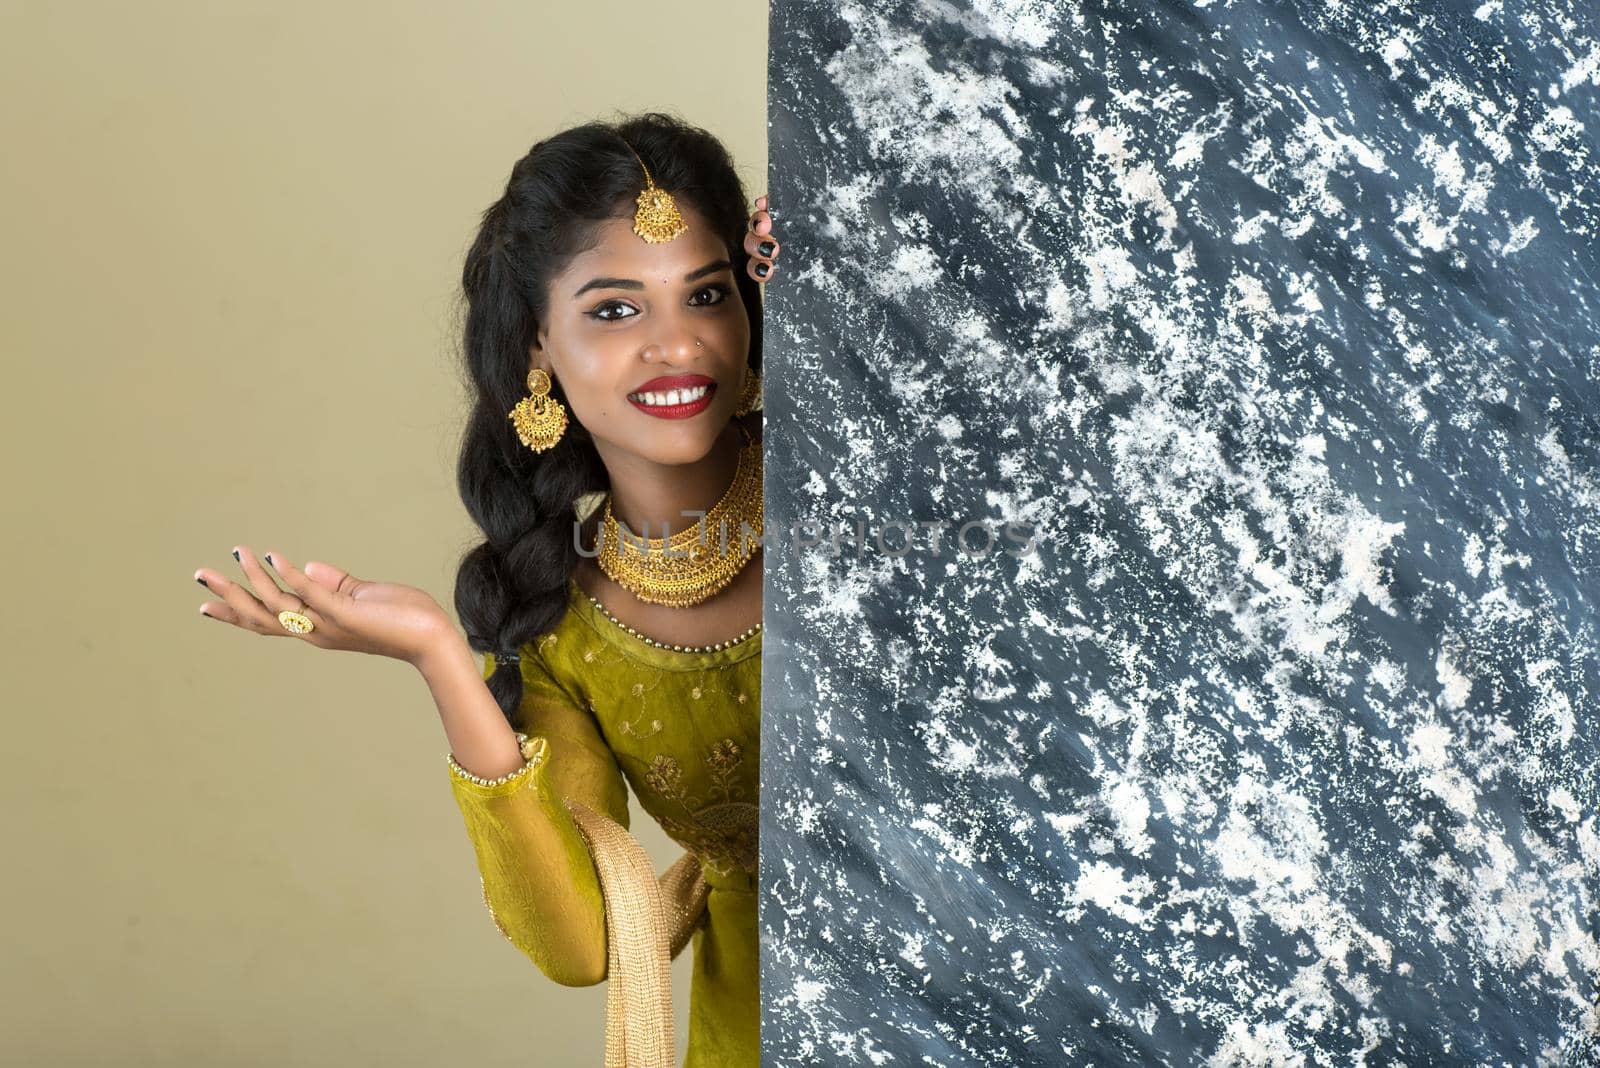 Traditional Girl holding and showing textured board by DipakShelare